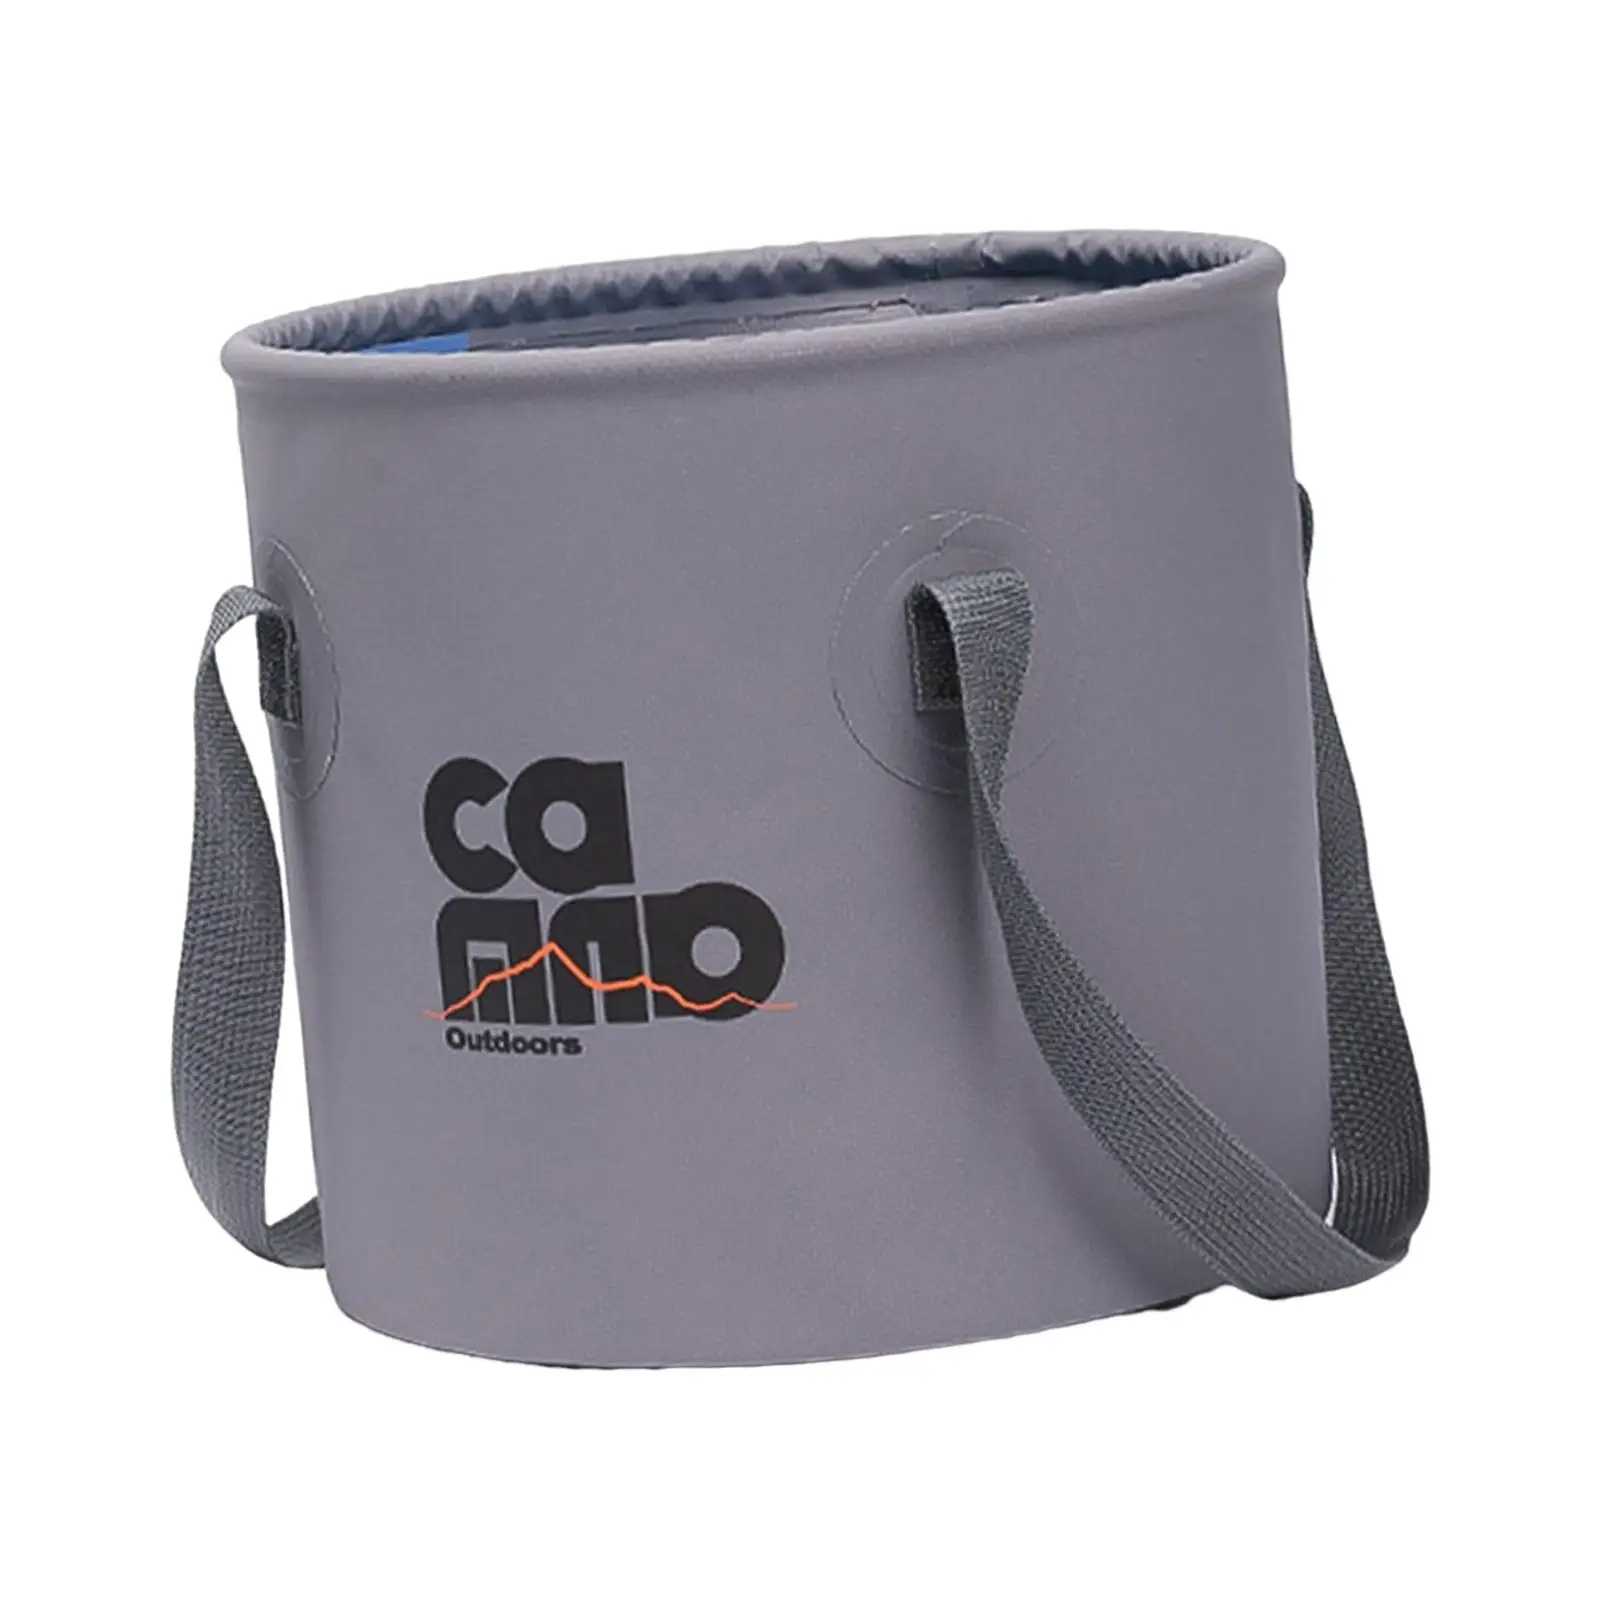 Collapsible Bucket Foldable High Temperature Resistance for Fishing Travel